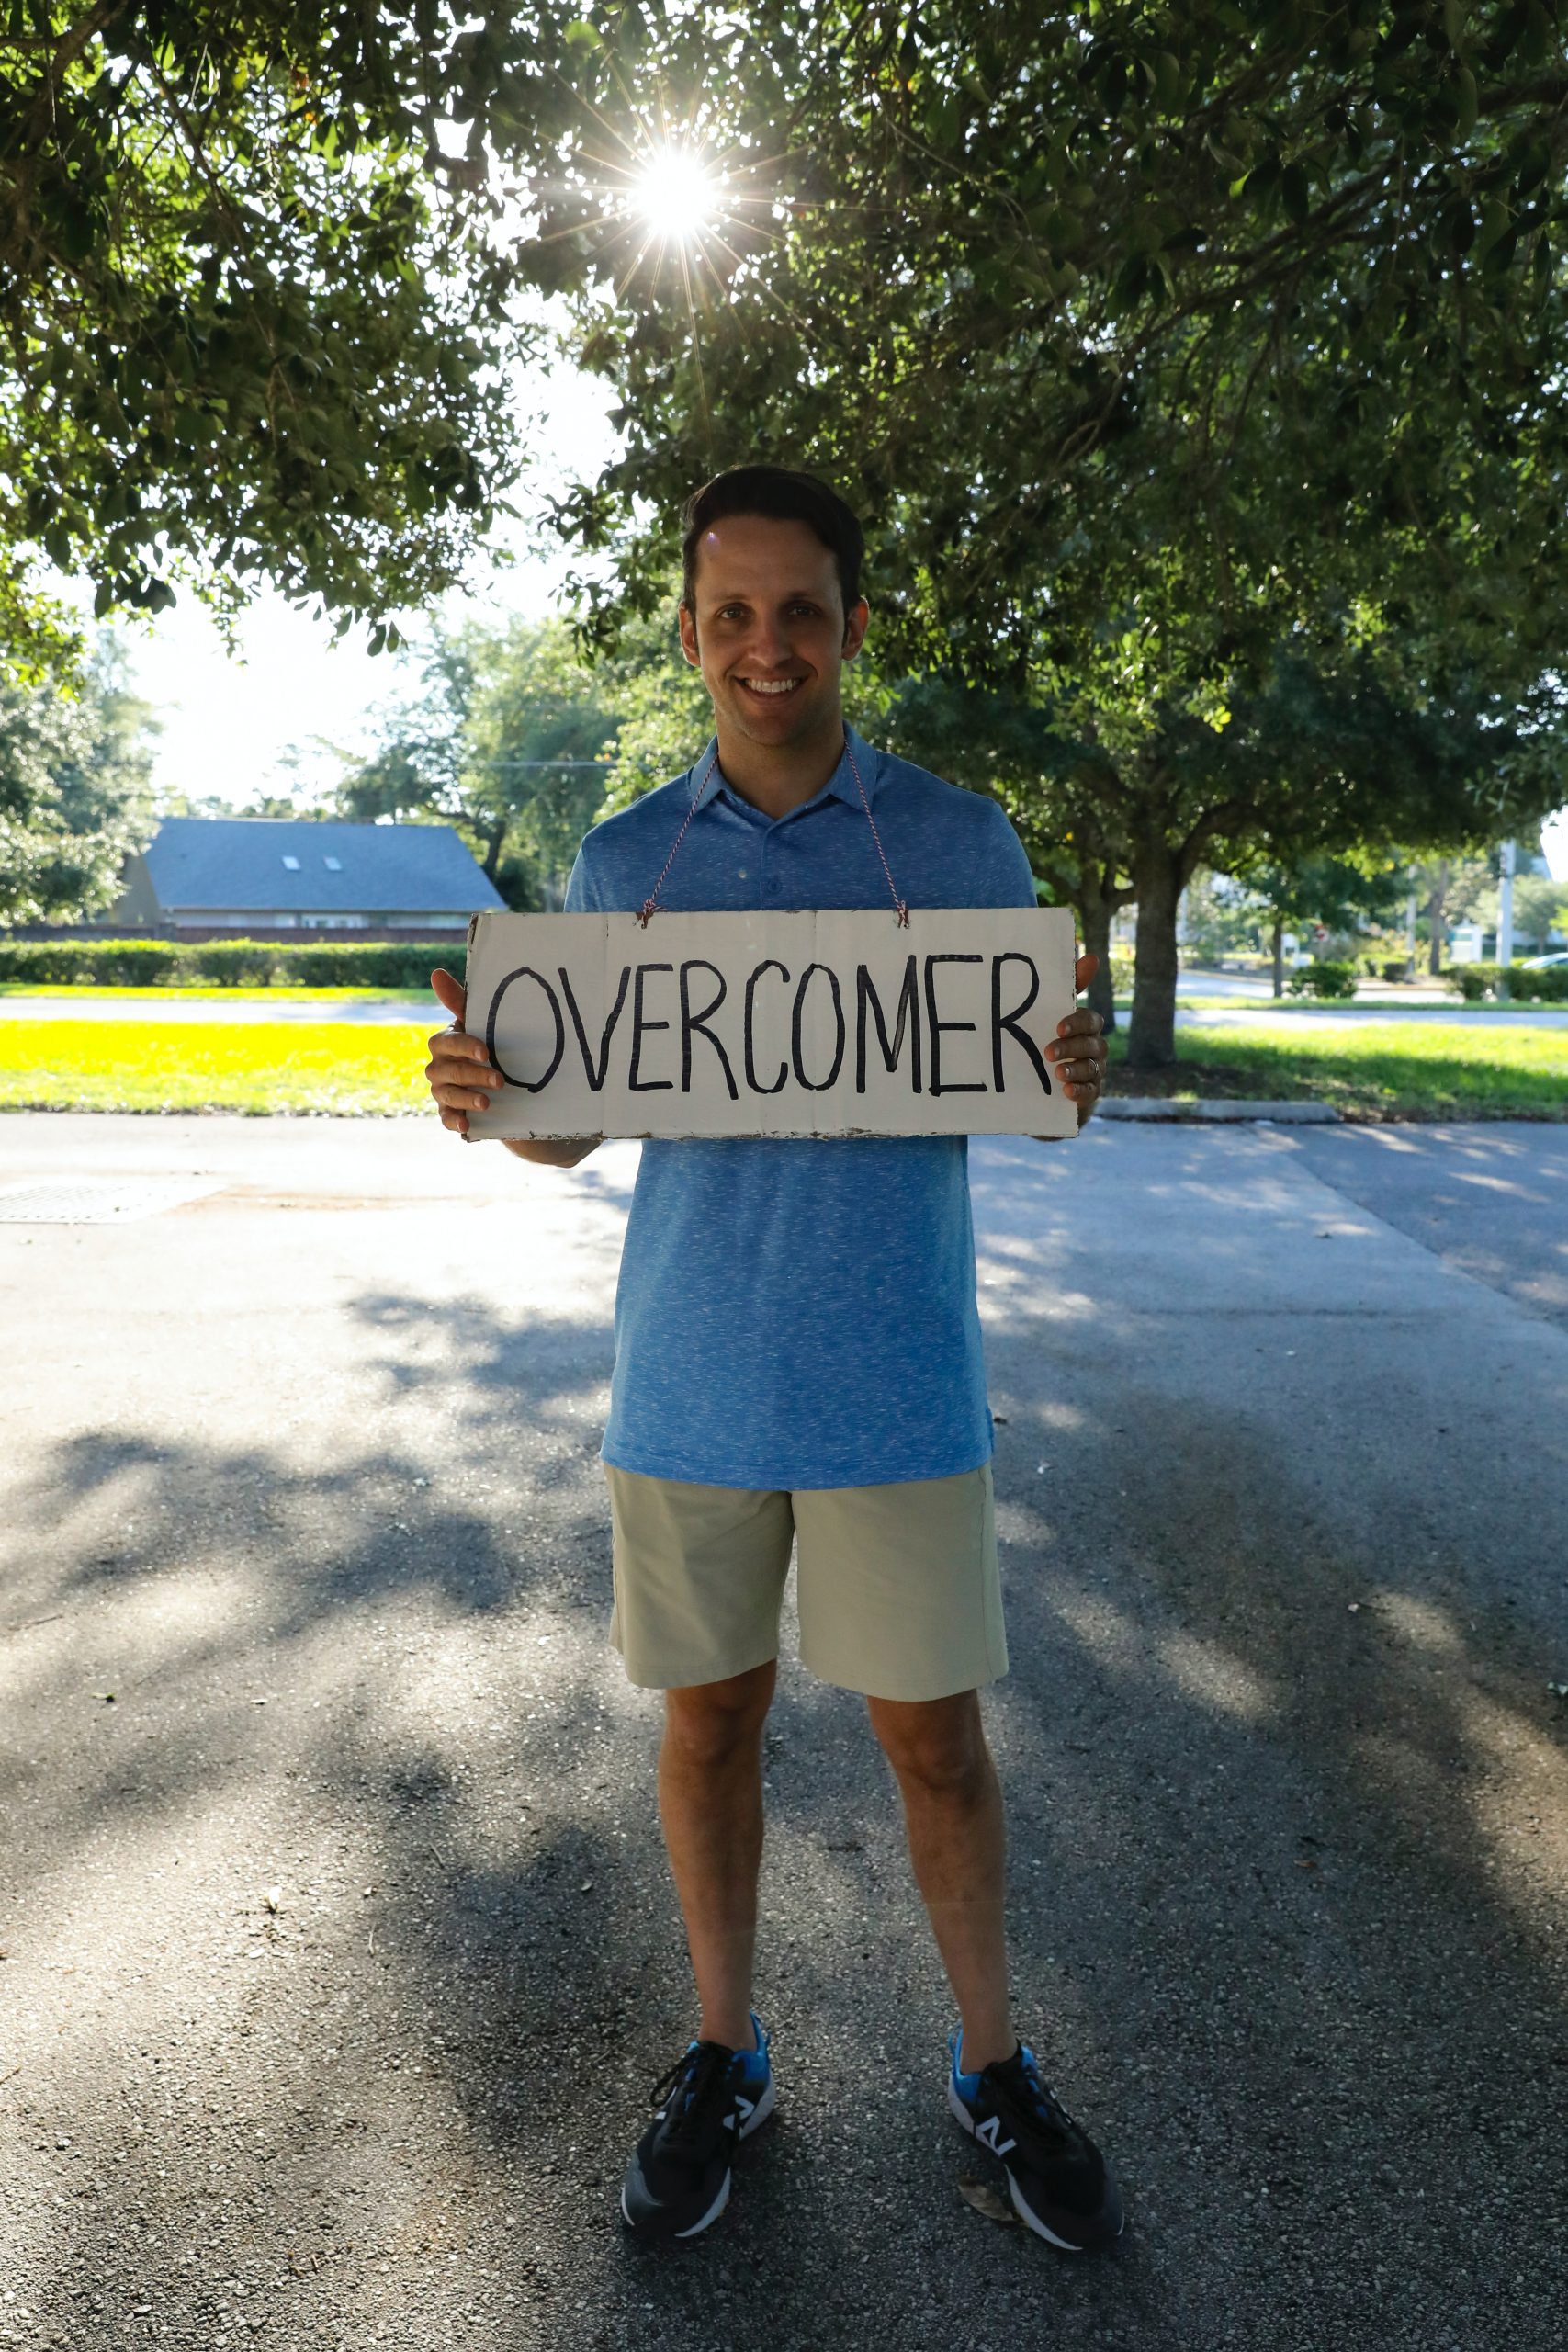 a man holding a sign that says "overcomer"